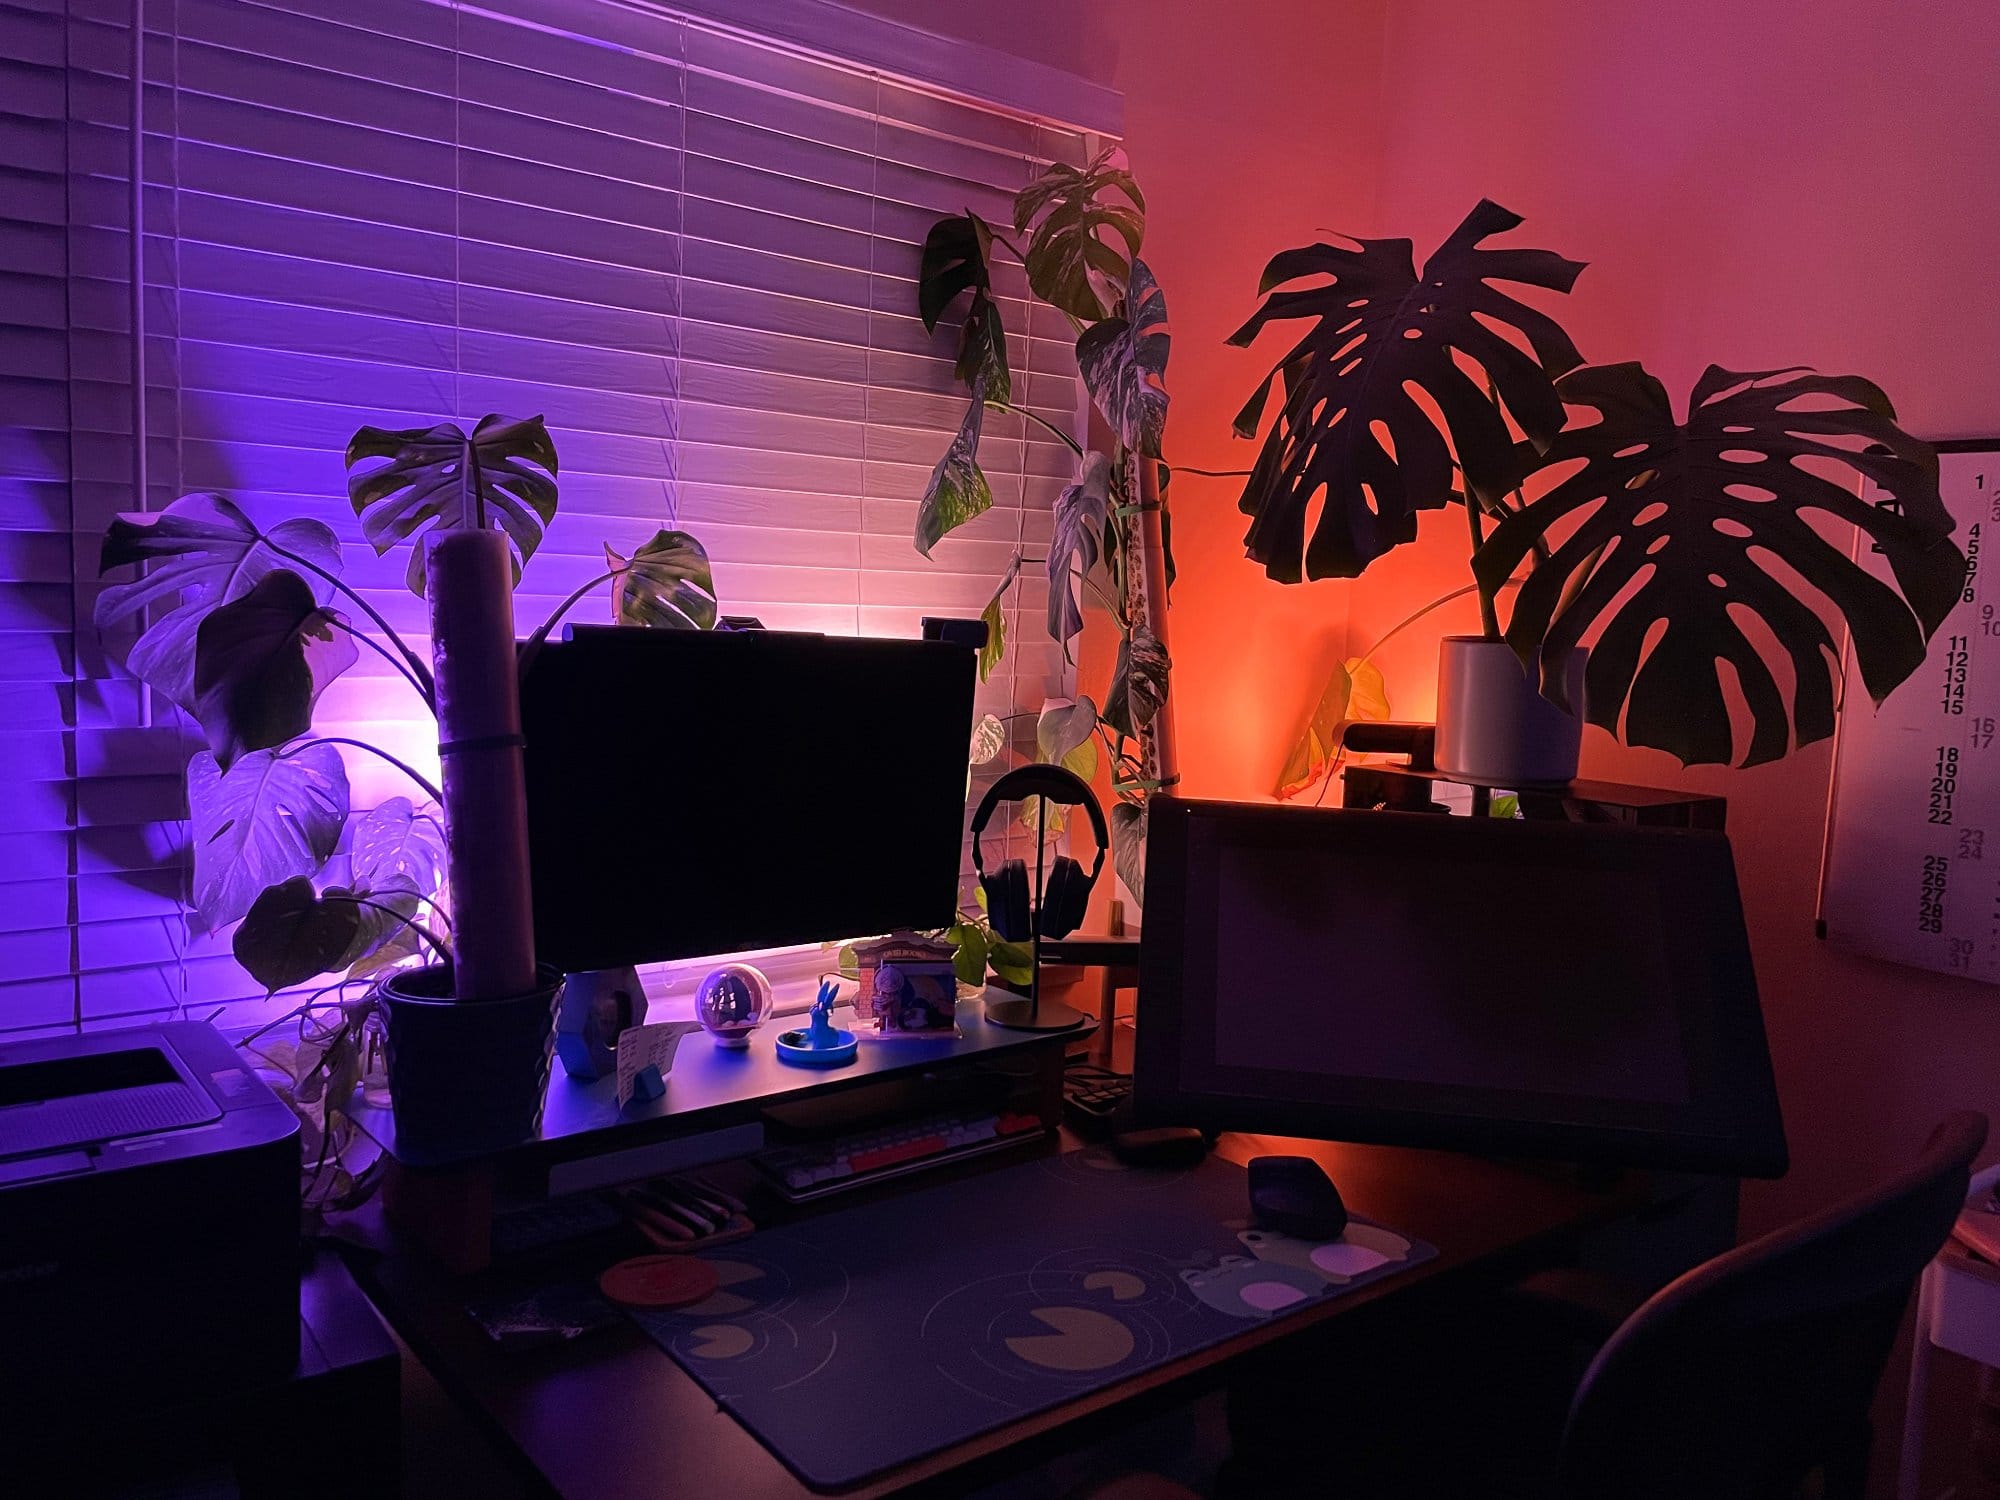 An atmospheric home office illuminated with purple and red hues, featuring a monitor, graphic tablet, and silhouetted plants against the blinds